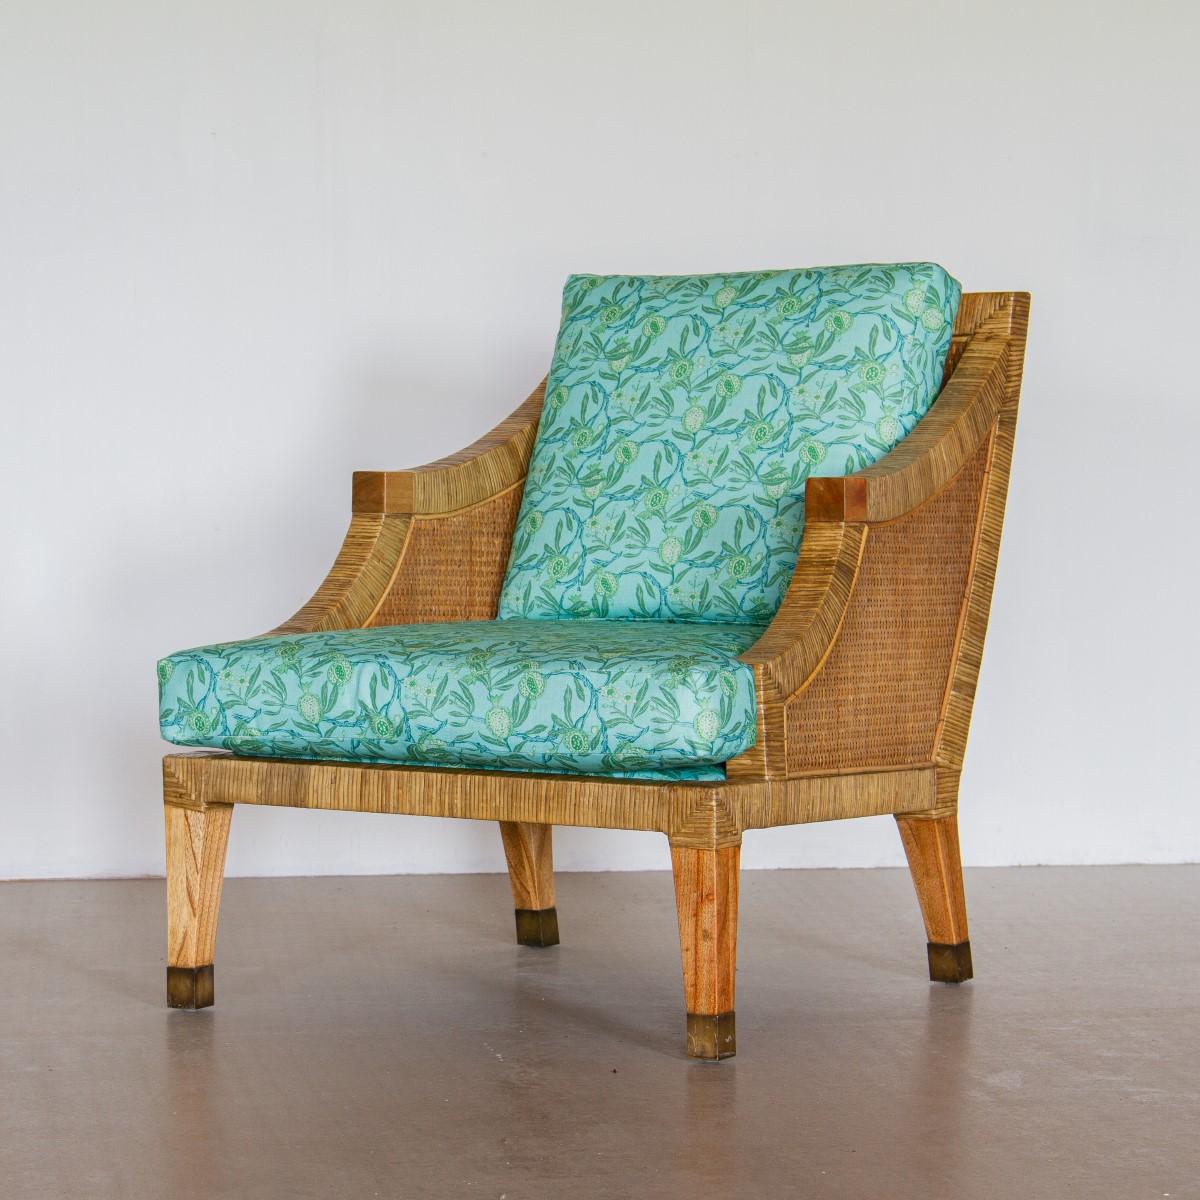 A pair of rattan framed armchairs upholstered by KBS in a turquoise and green foliage linen, 1970s.